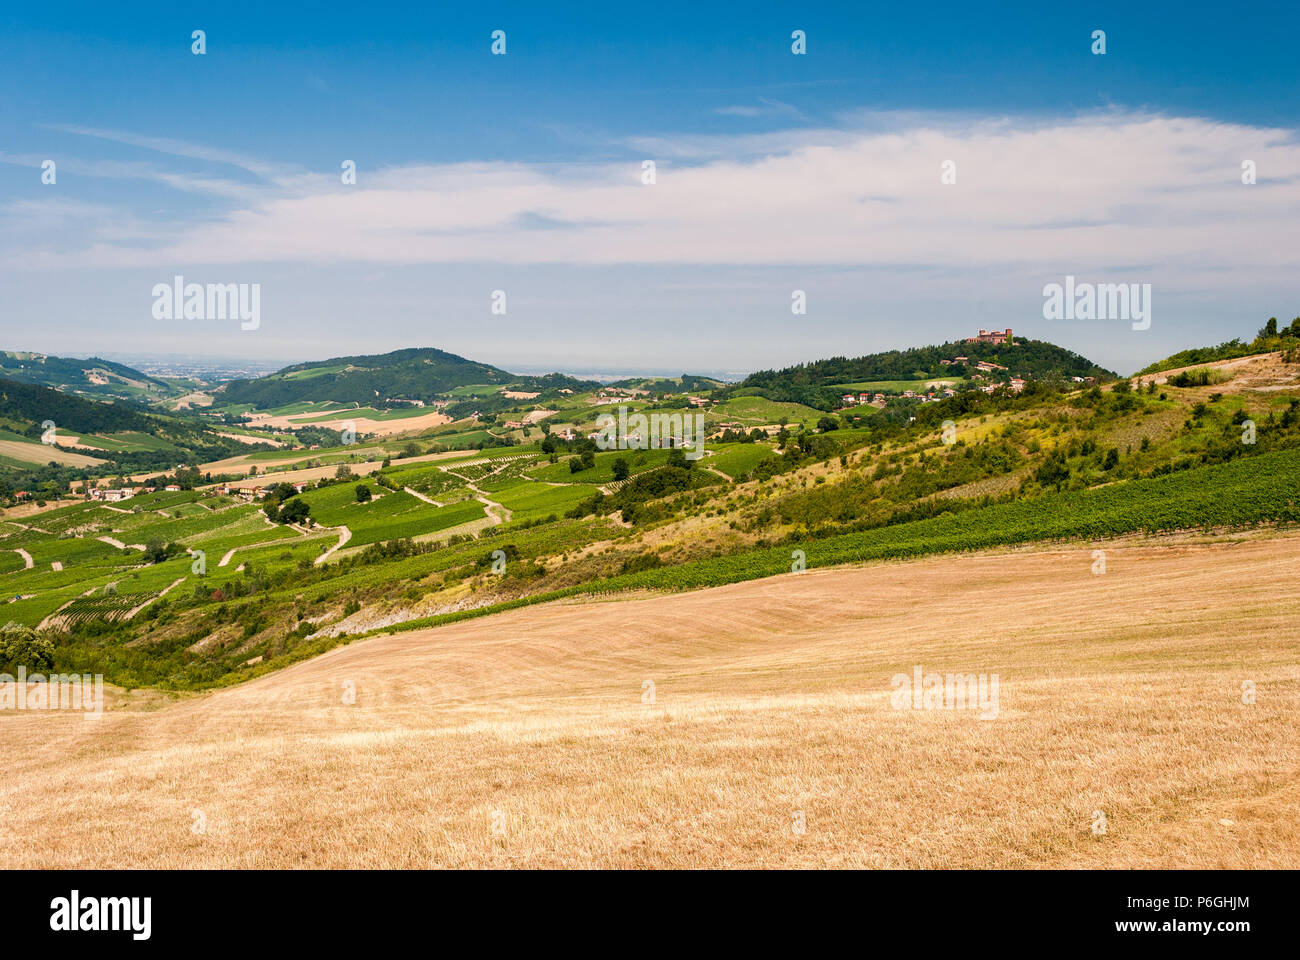 Cultivated hills in Oltrepo' Pavese (Lombardy, Italy) Stock Photo